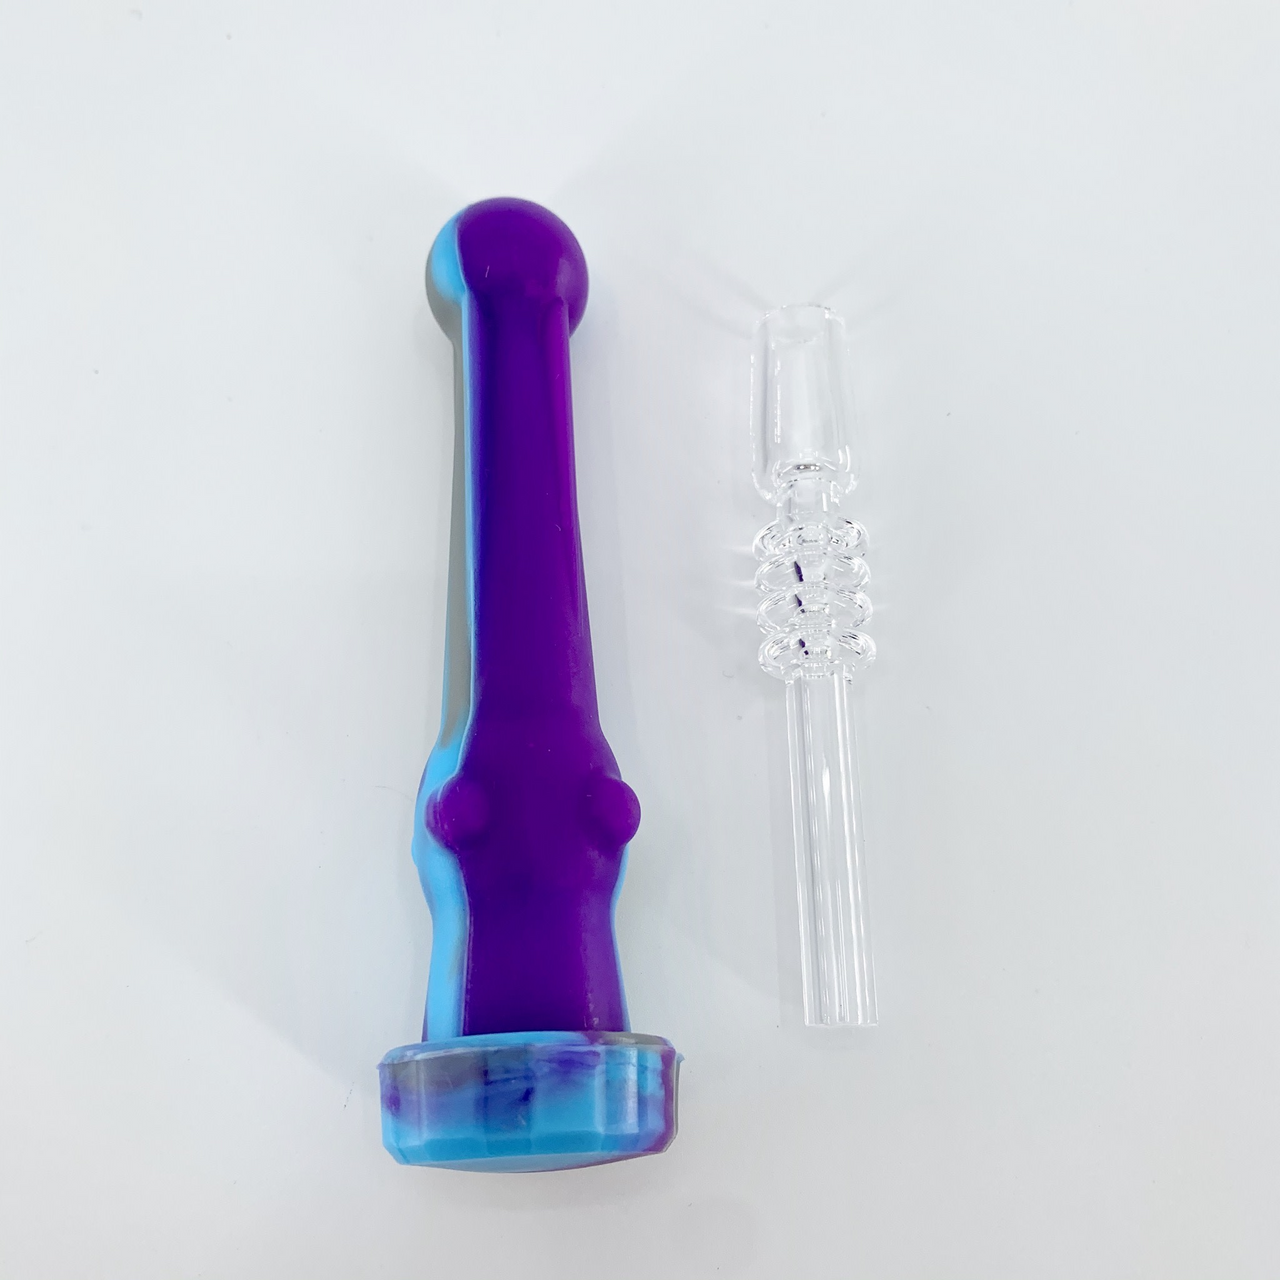 Silicone Nectar Collector with 14mm Quartz Nail - Assorted Colors